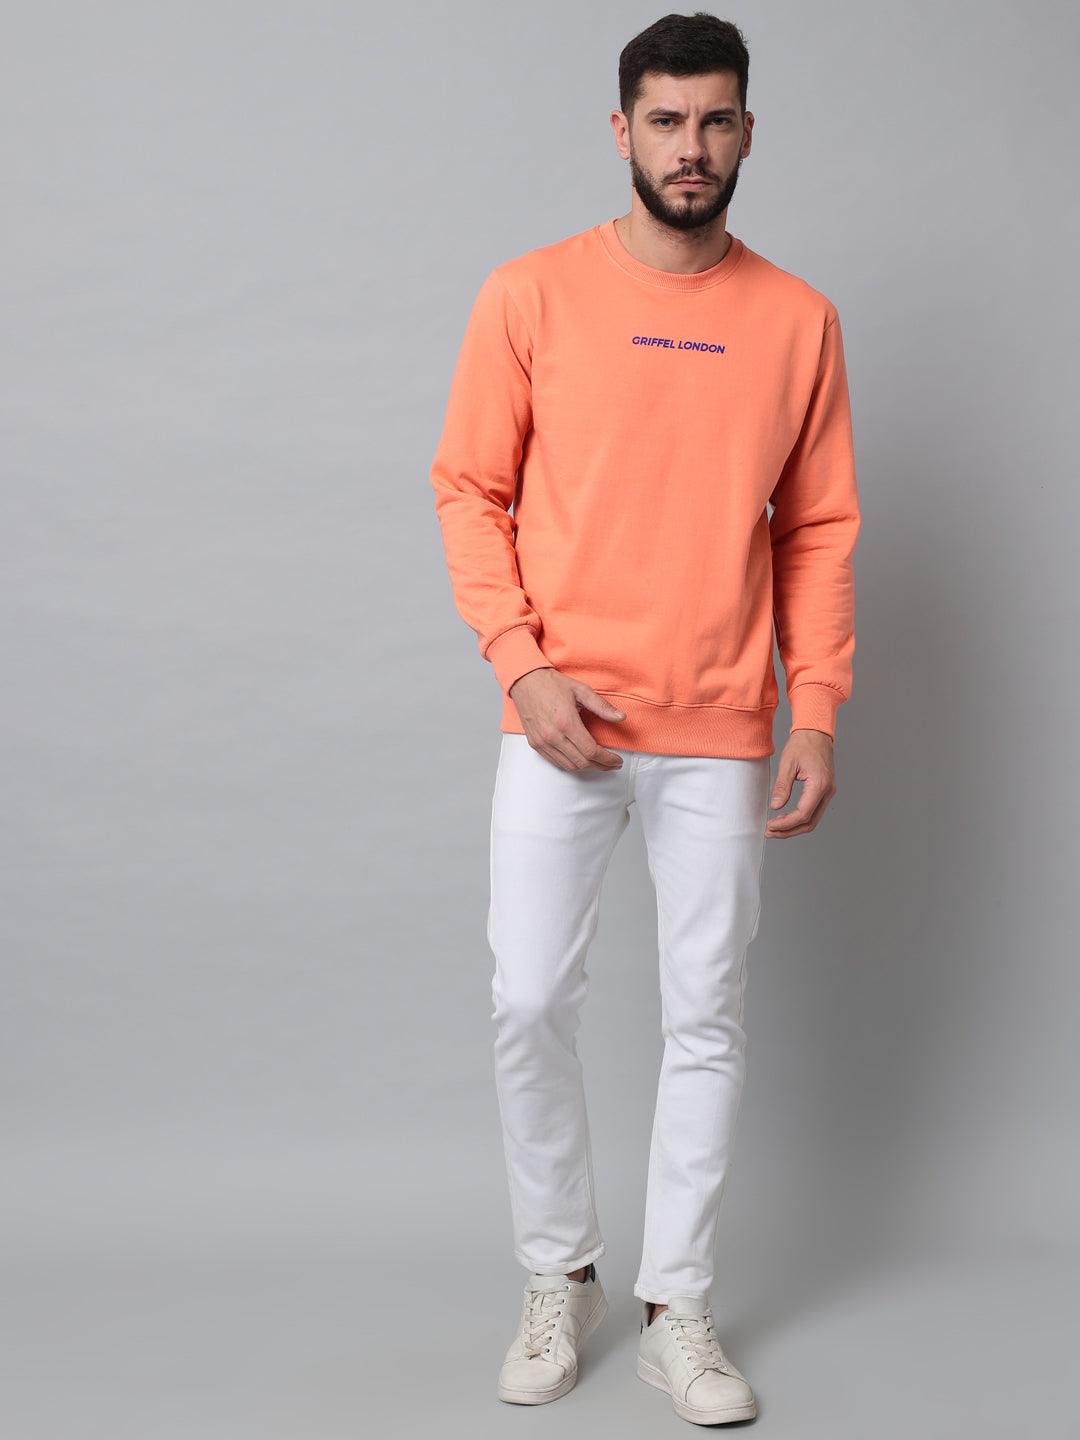 Griffel Men's Cotton Fleece Round Neck Peach Sweatshirt with Full Sleeve and Front Logo Print - griffel